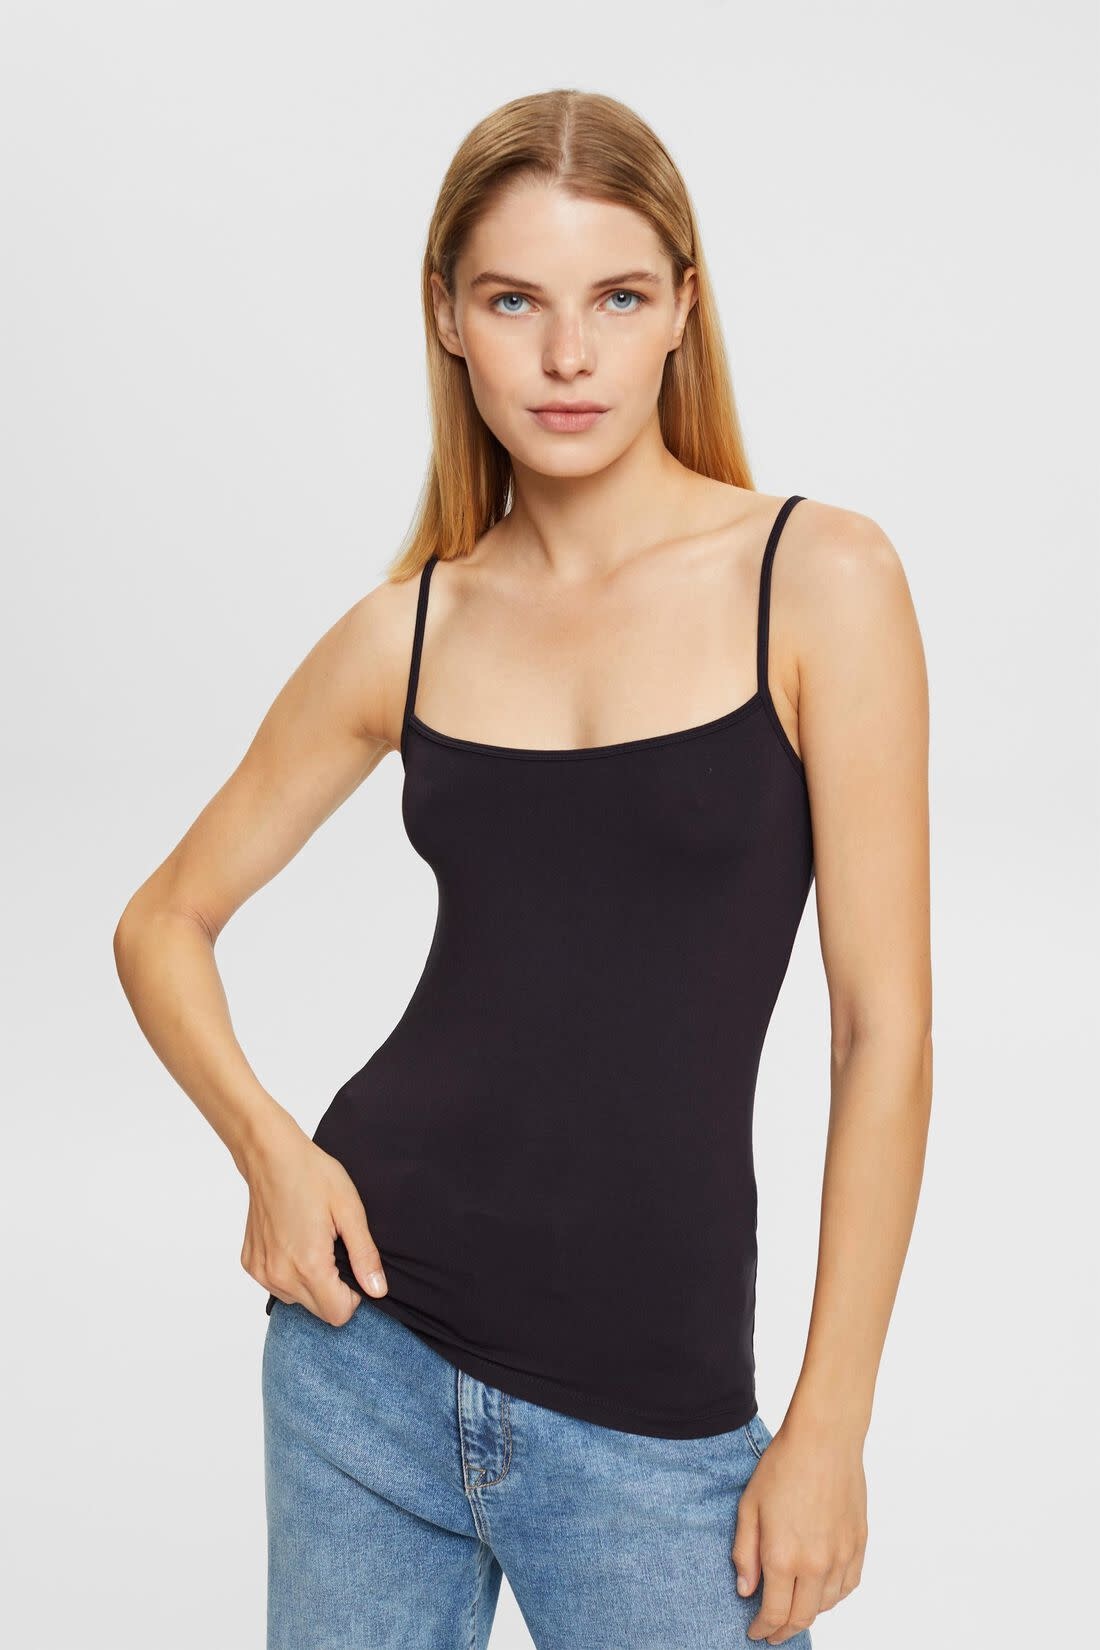 Pass Me By Dressy Camisole